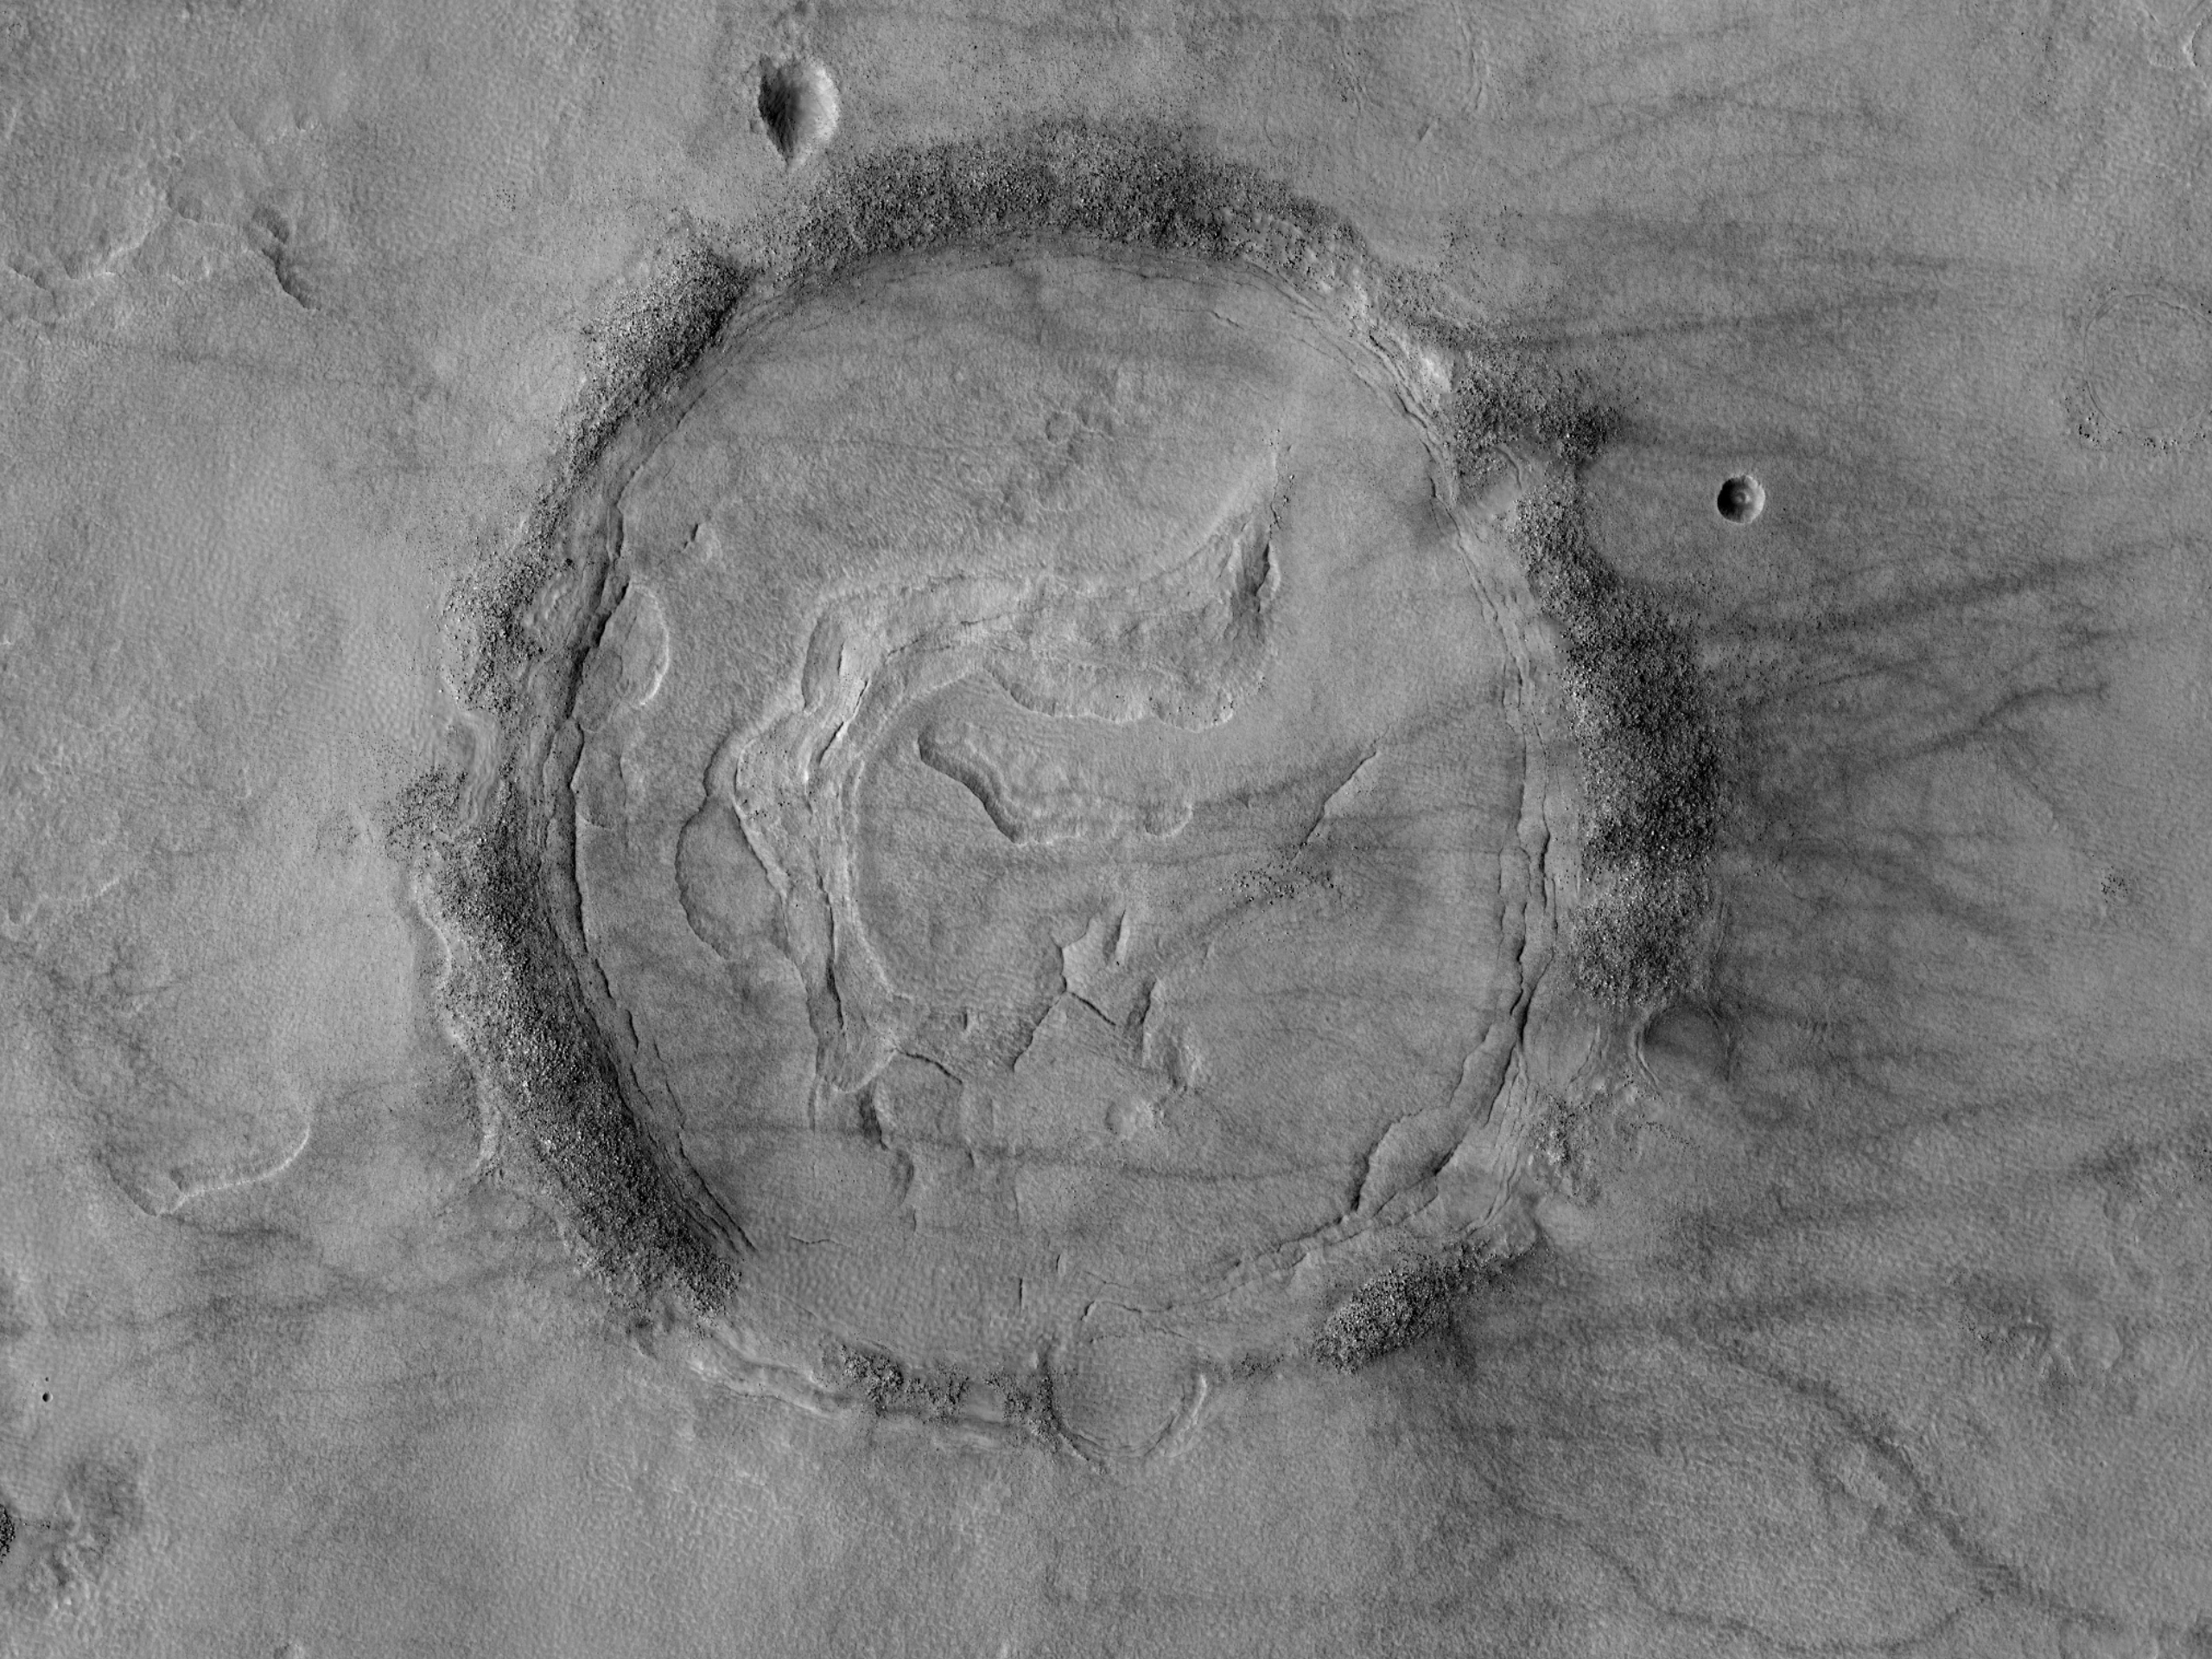 Crater with Lobate Infilling